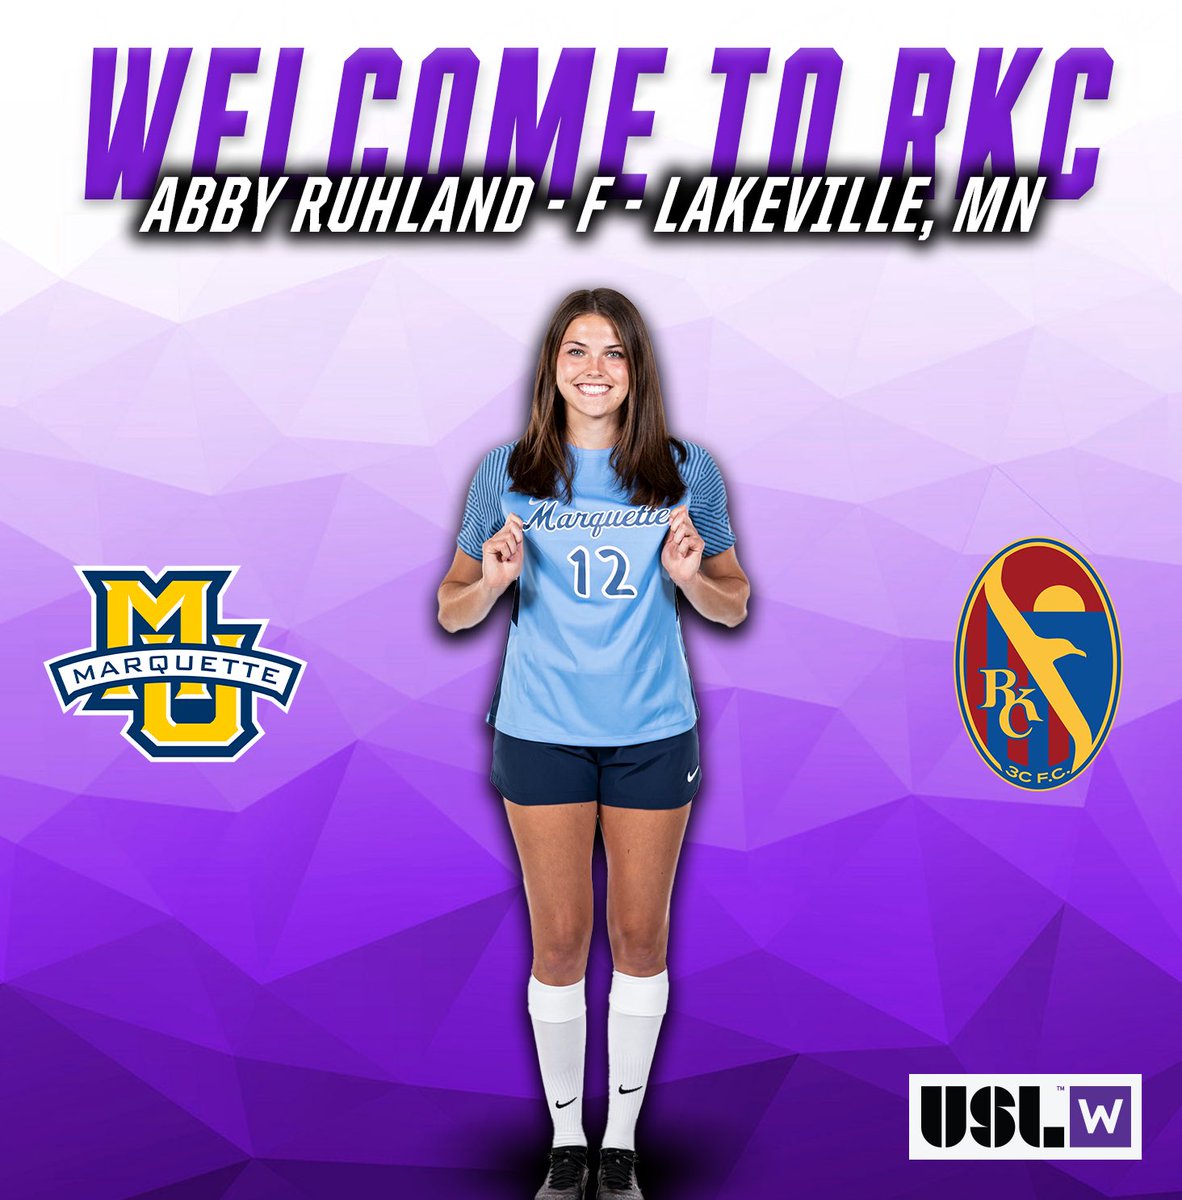 WELCOME, ABBY! 

@abbyruhland_ joins RKC! The Lakeville, MN native finished her sophomore year with @MarquetteWSOC in 2023. In the 22-23 season, she was a member of the @BIGEAST All-Academic team.

(Pending League and Federation Approval) 

#262Made | #ForTheW
@USLWLeague